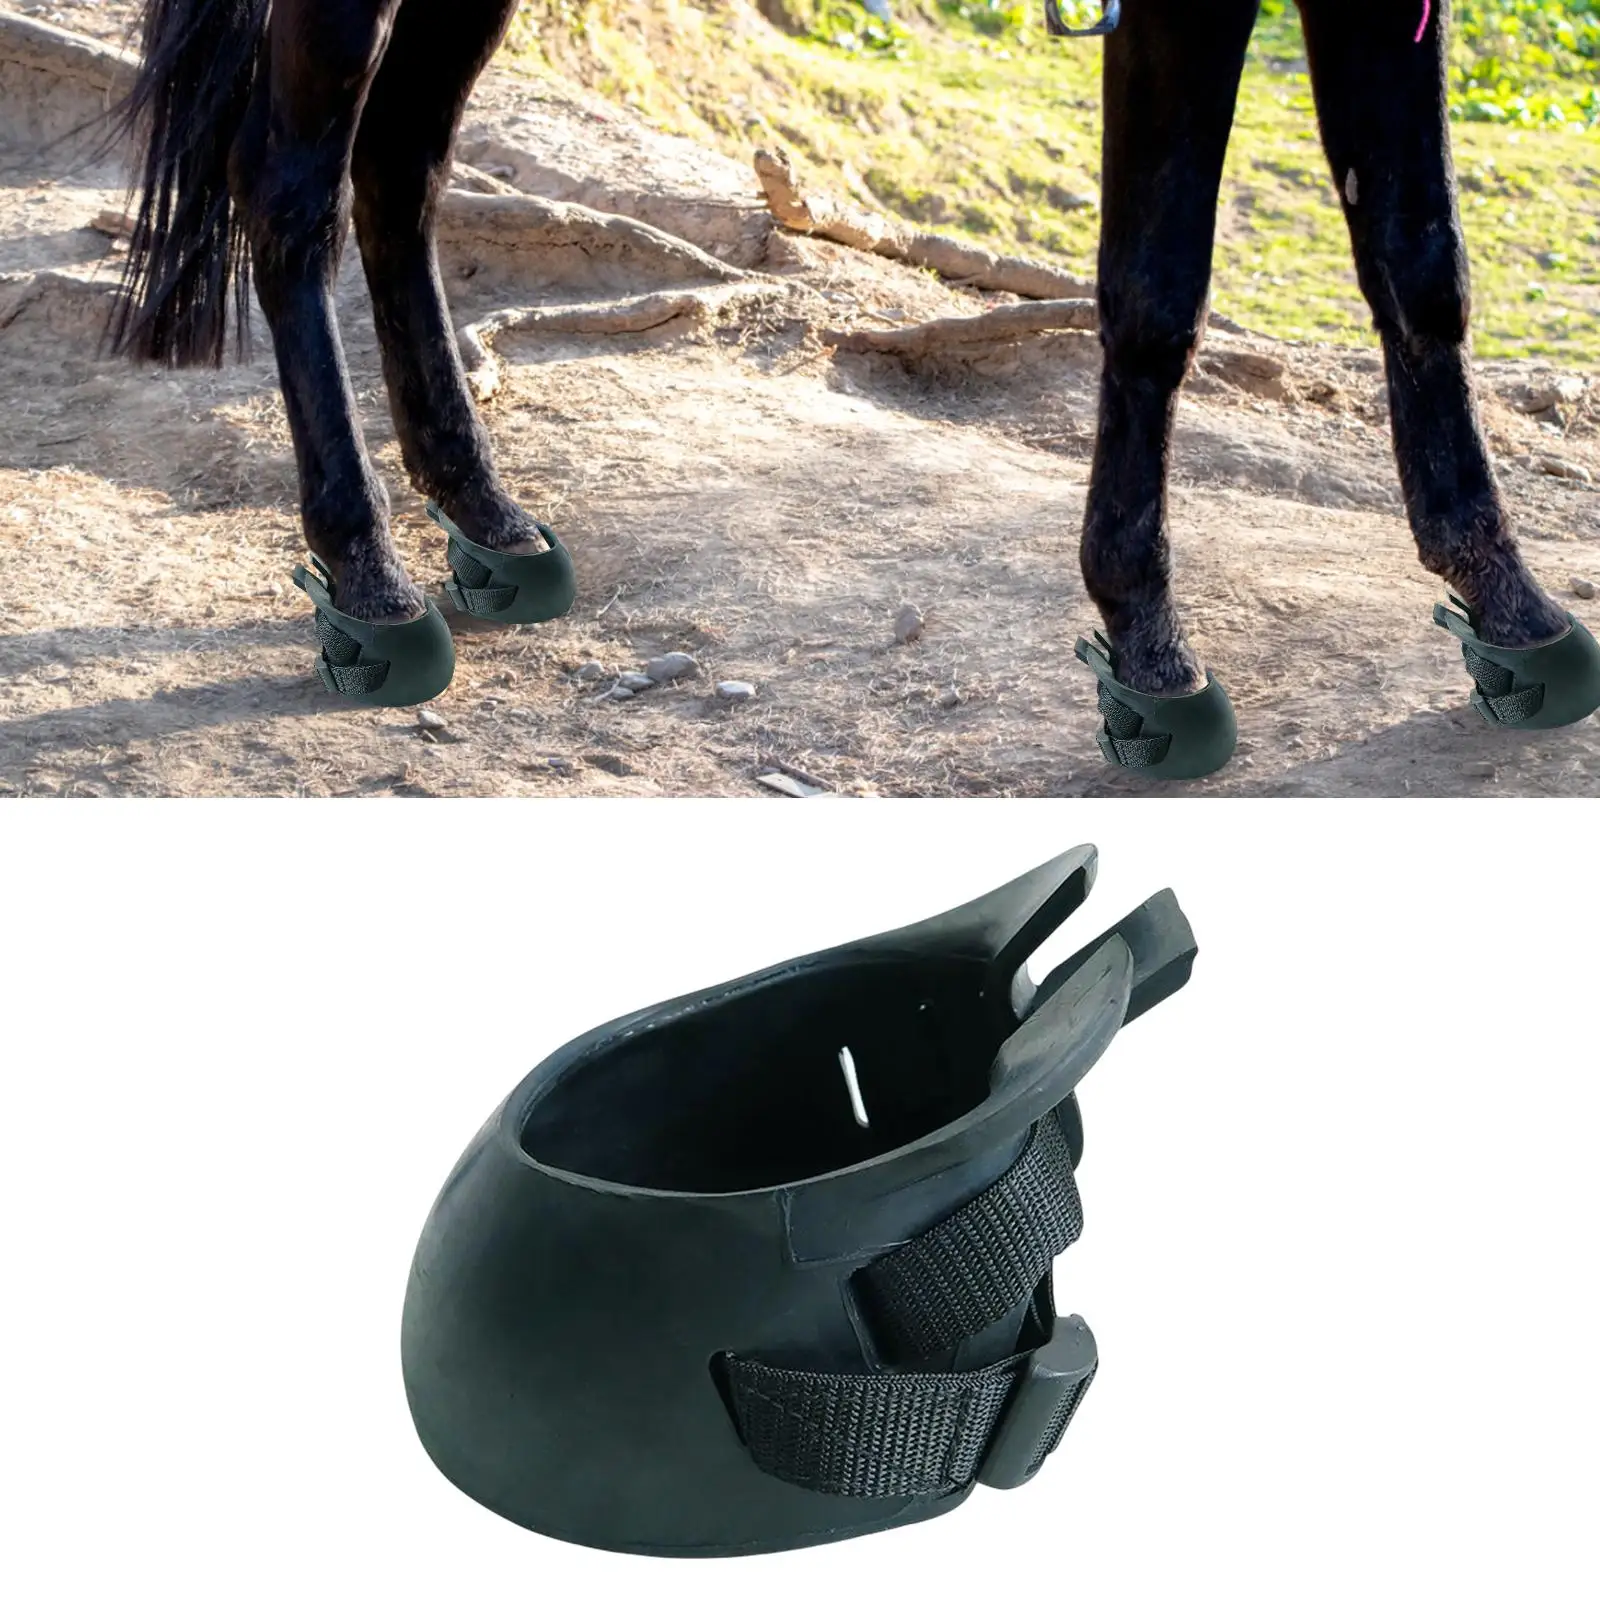 Horse Hoof Boot Durable Hoof Protector Portable Rubber Hoof Protection Boot Foot Guard for Jumping Riding Training Attachment